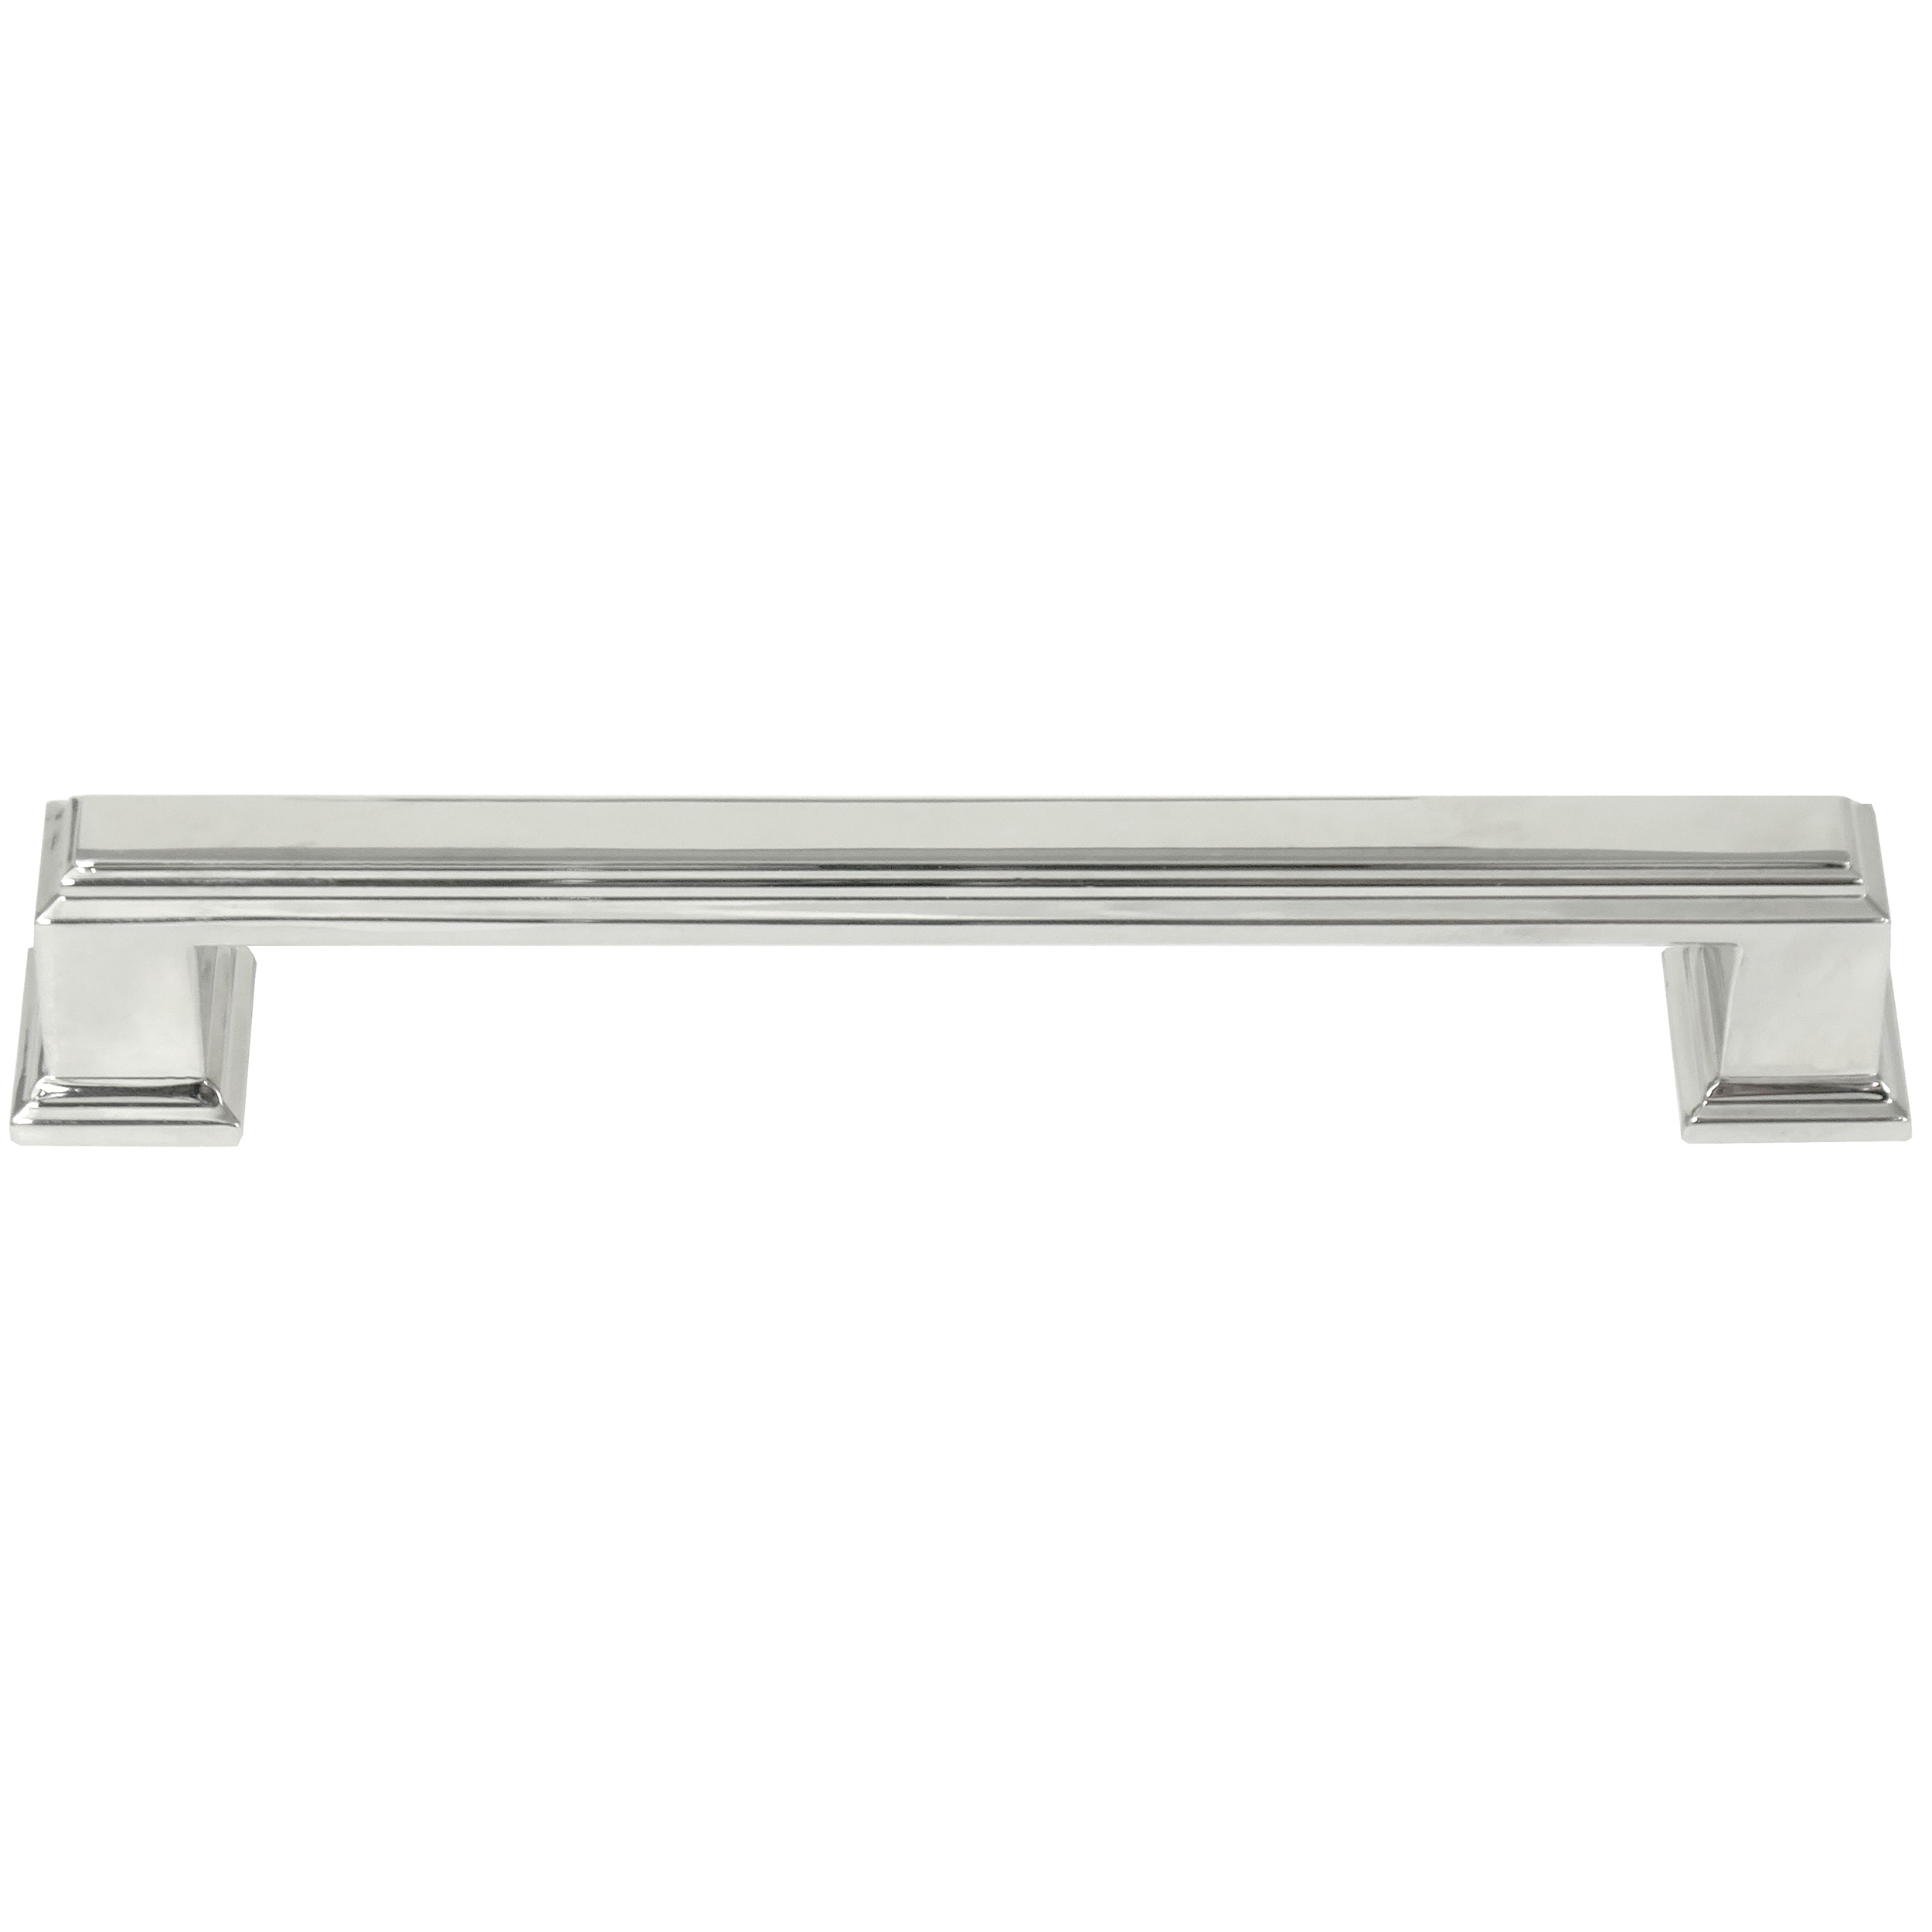 Beacon Hill 11-5/16-in Center to Center Polished Nickel Rectangular Handle Drawer Pulls in Chrome | - MNG Hardware 19214